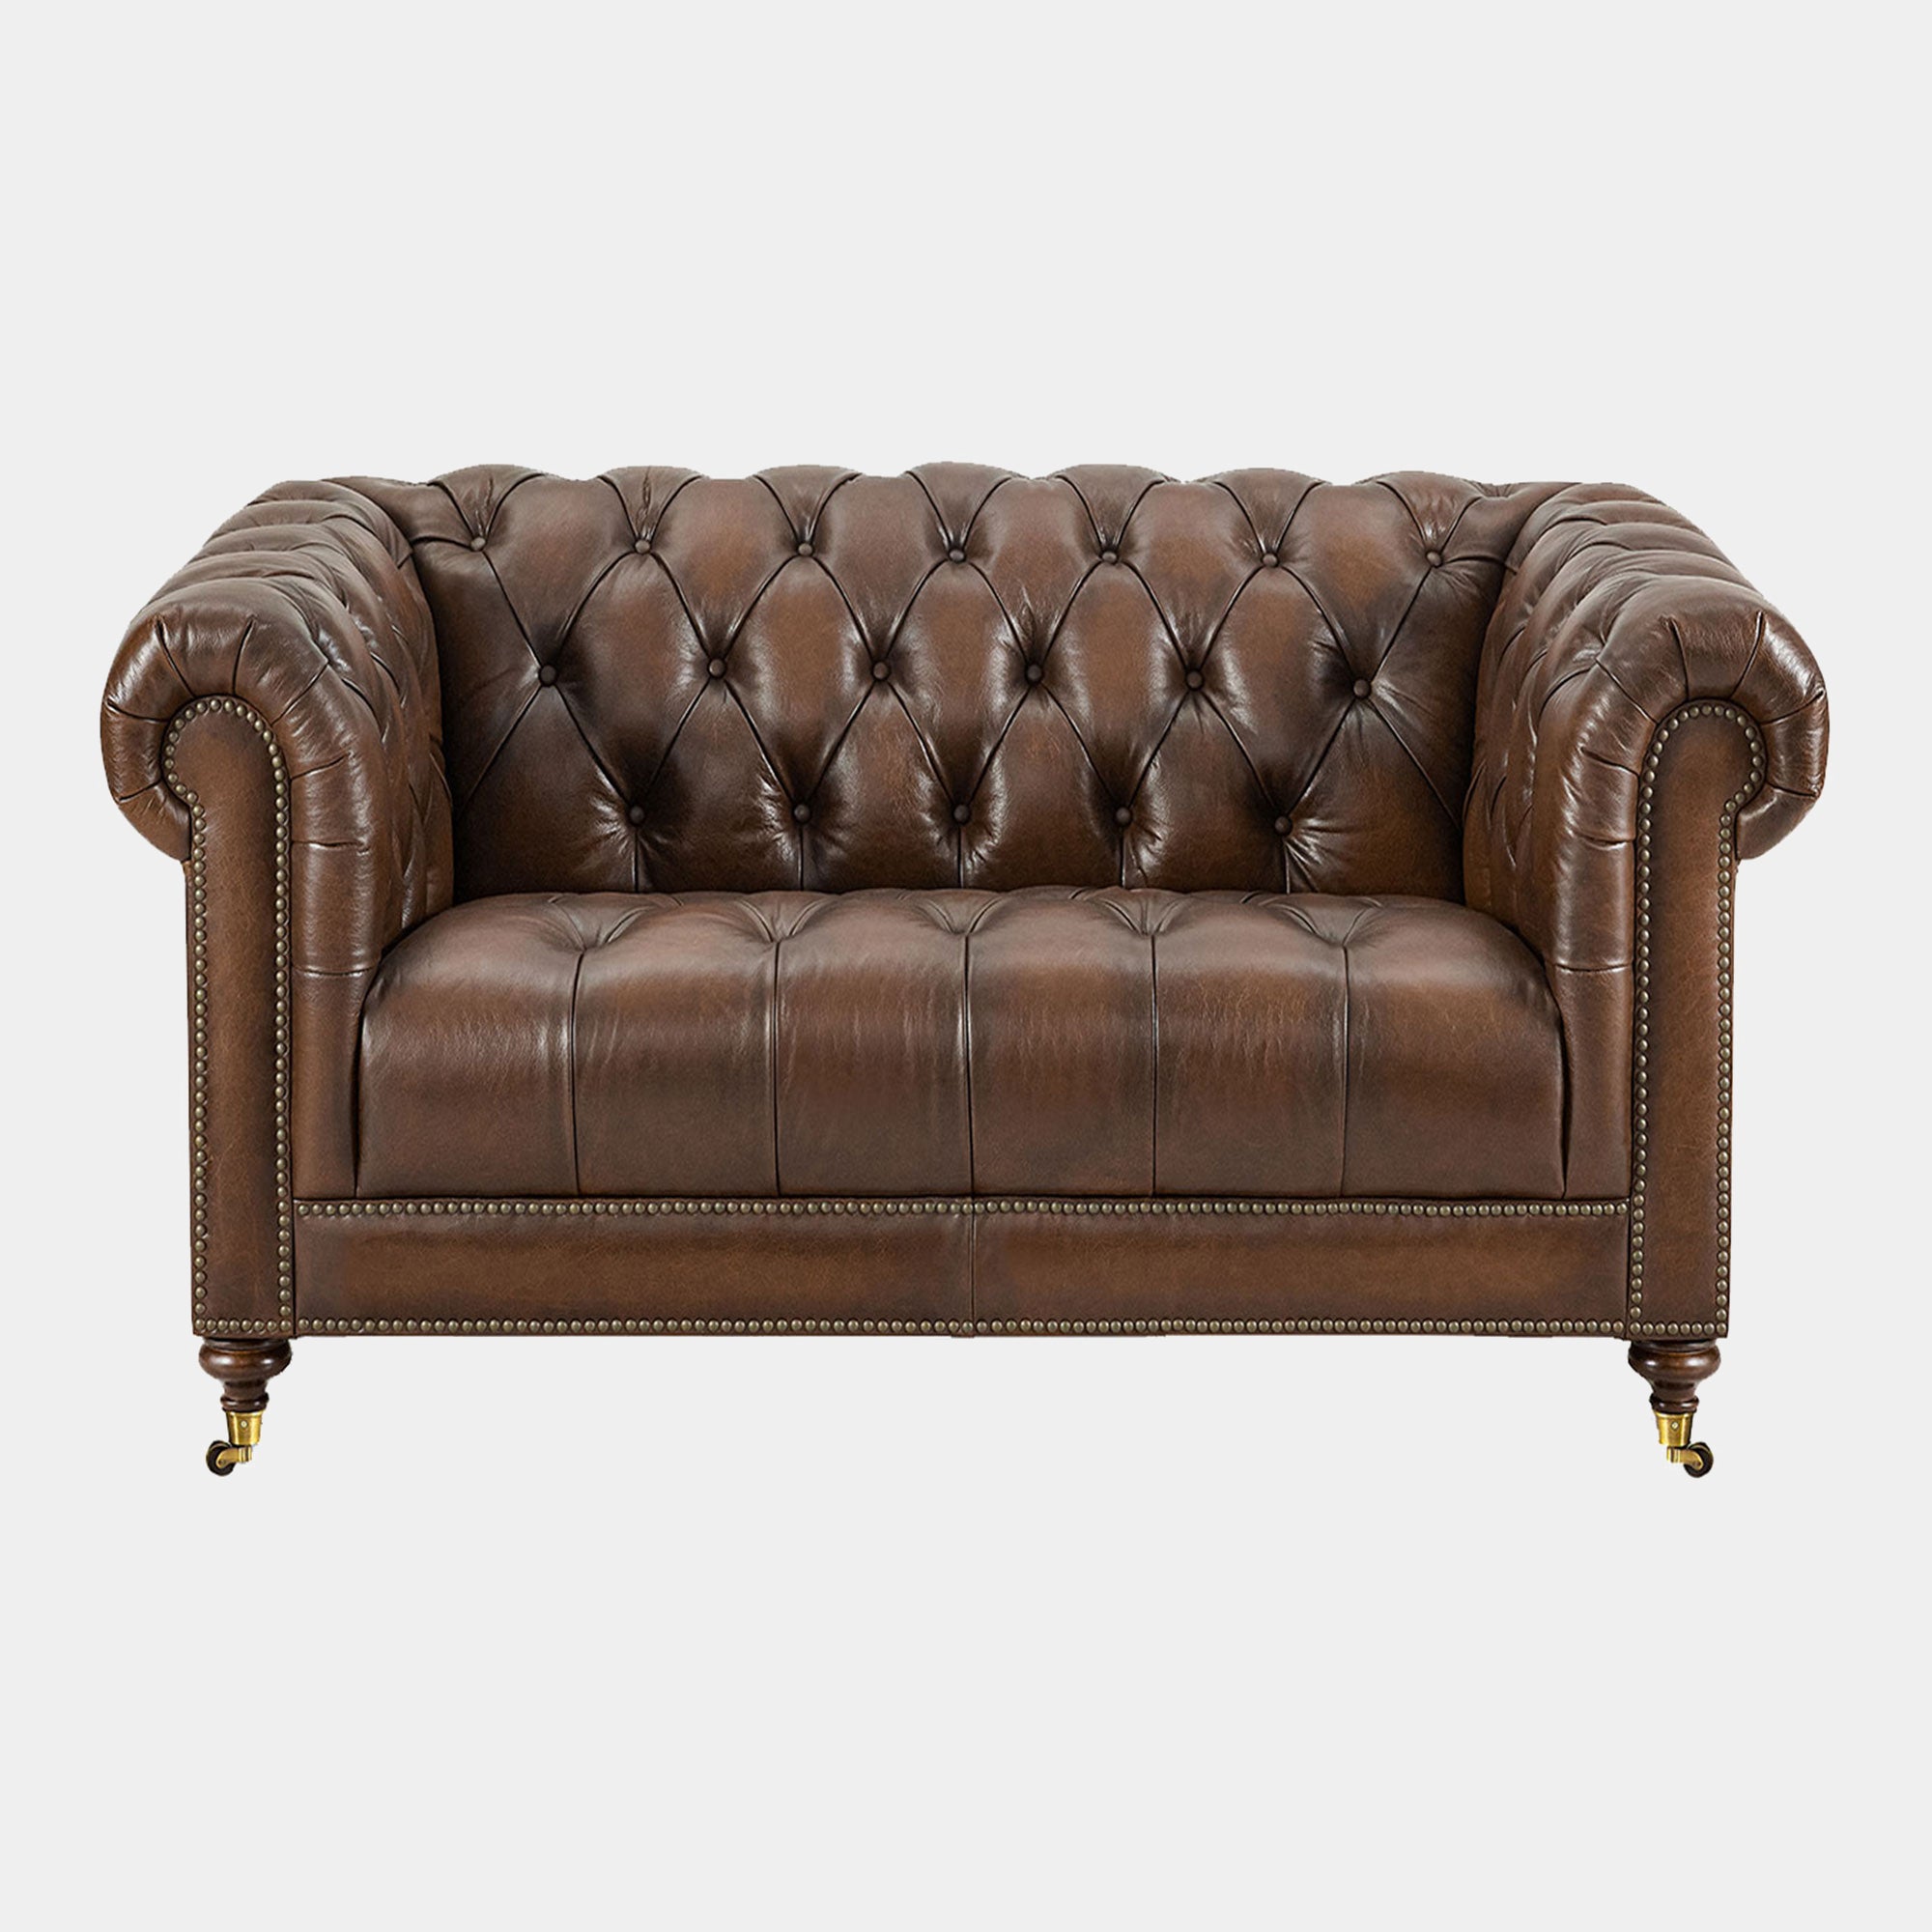 Churchill - 2 Seat Sofa In Leather Vintage LLS Cognac 1806/Antique Brass Studs With Mahogany Feet